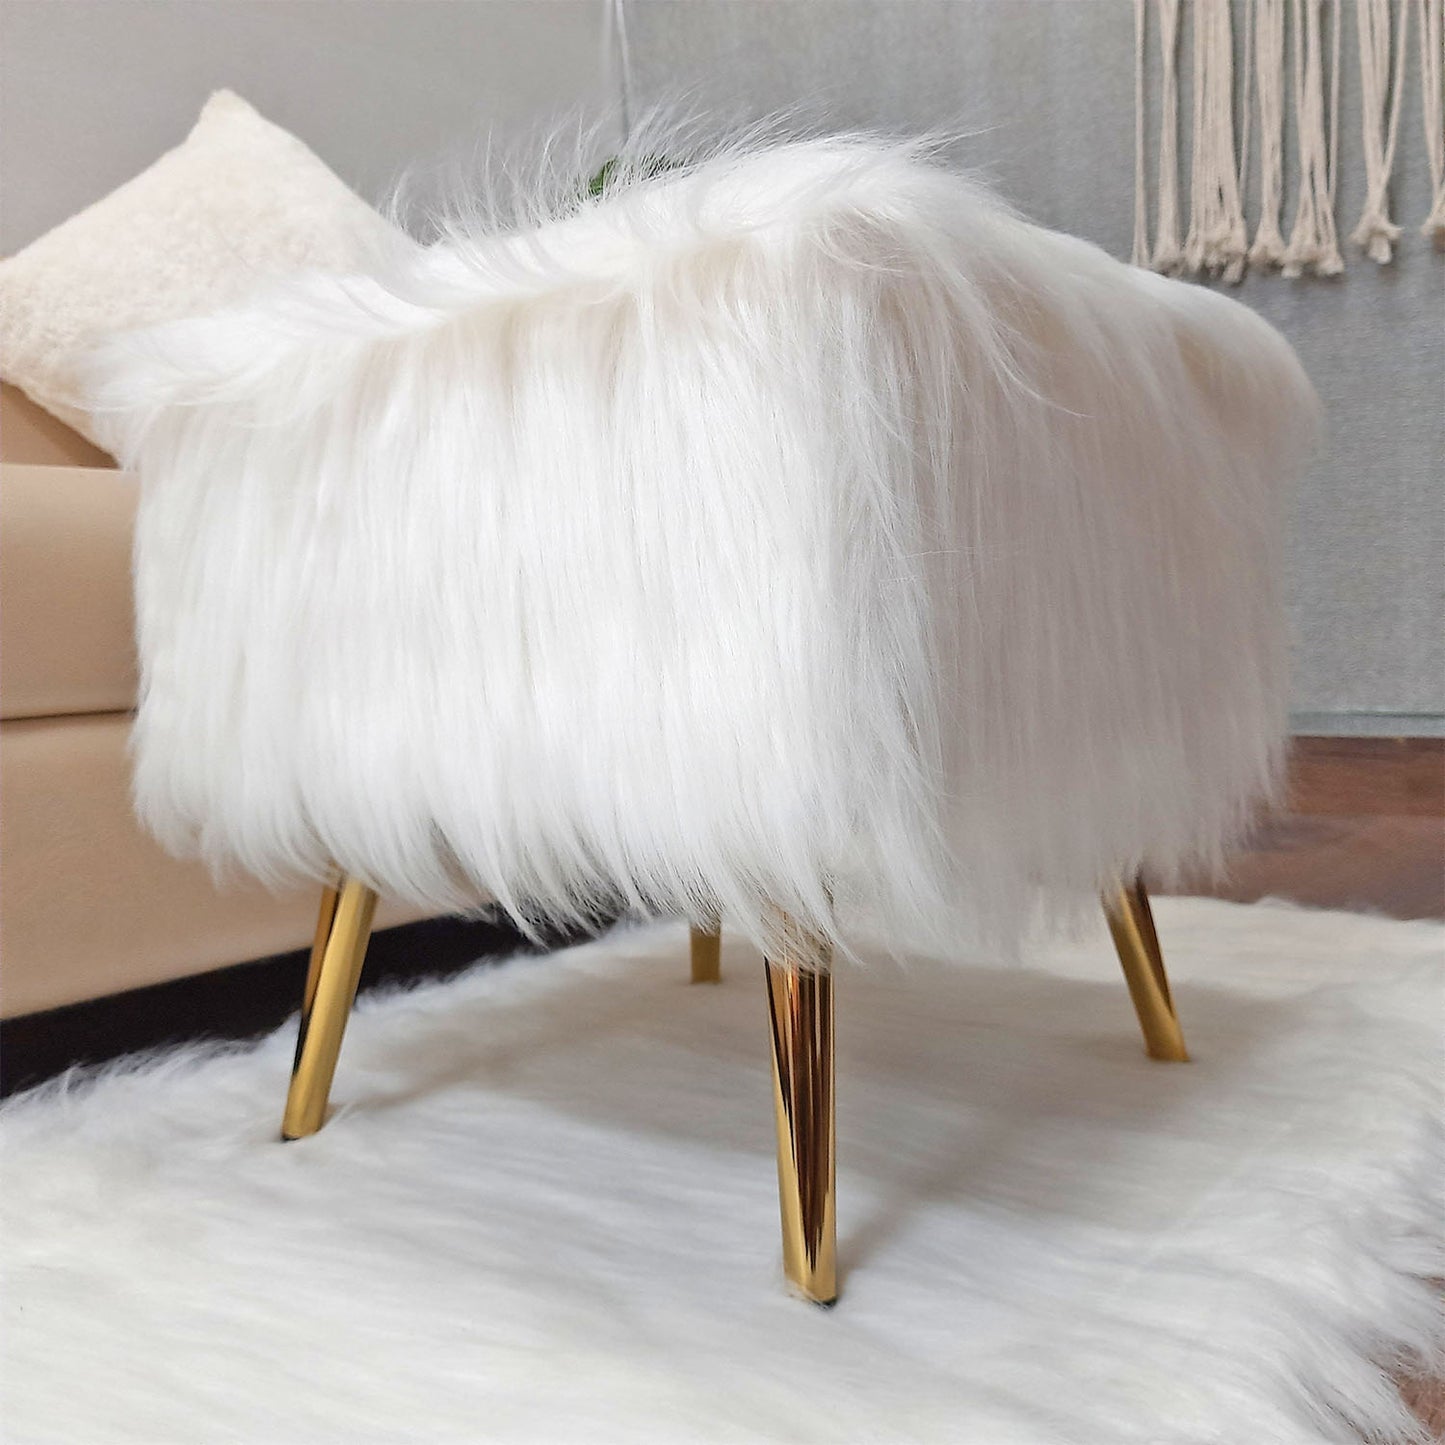 Noviato Collection – White Premium Long Faux Fur Footstool Gold Metal Legs Modern On-Trend Style Square Multi-Functional Ottoman Stool Seat, 40 cm Tall | from Avioni